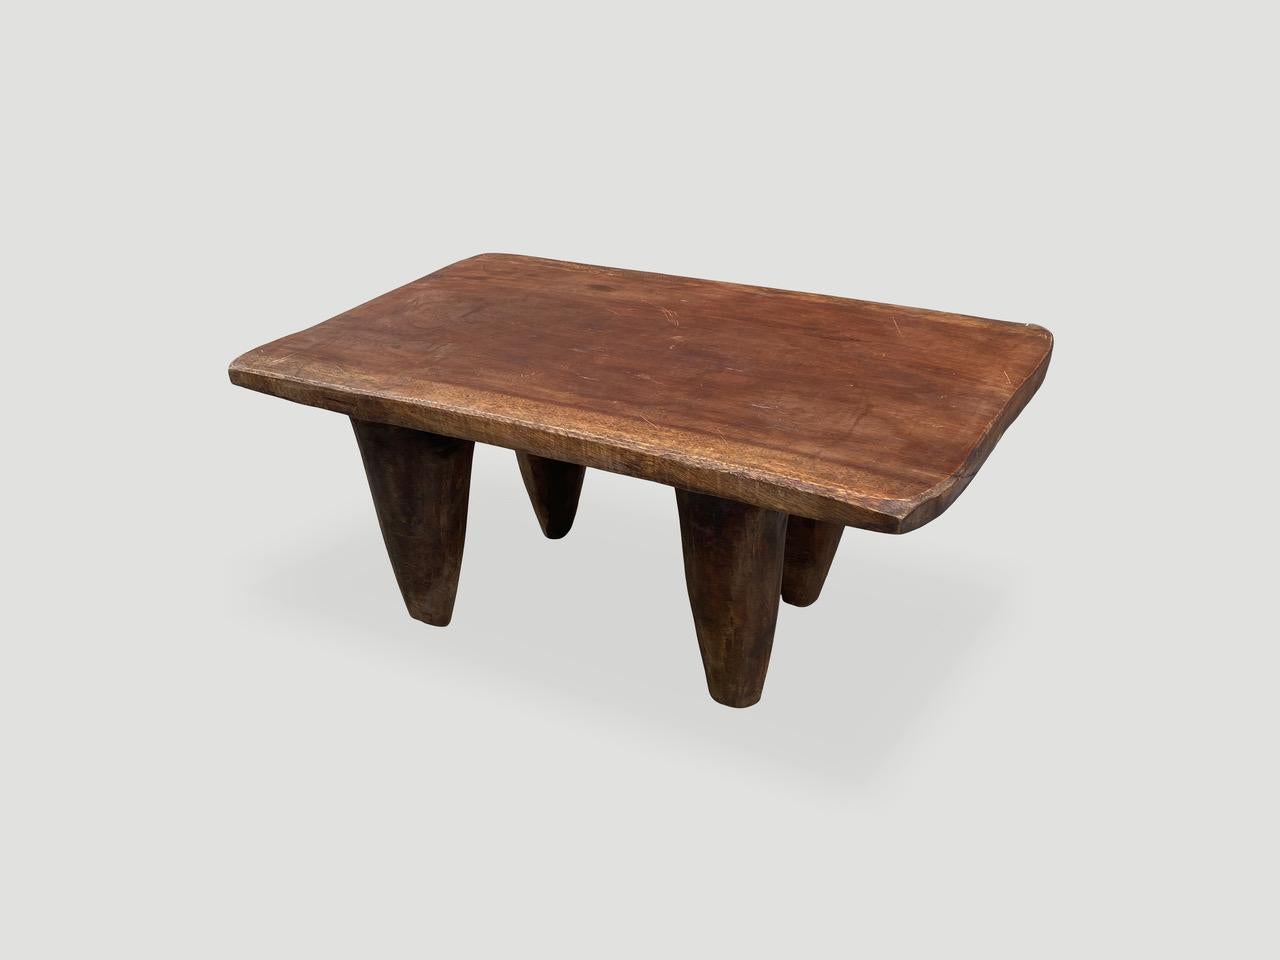 Ivorian Andrianna Shamaris Antique African Senufo Coffee Table, Bench or Side Table